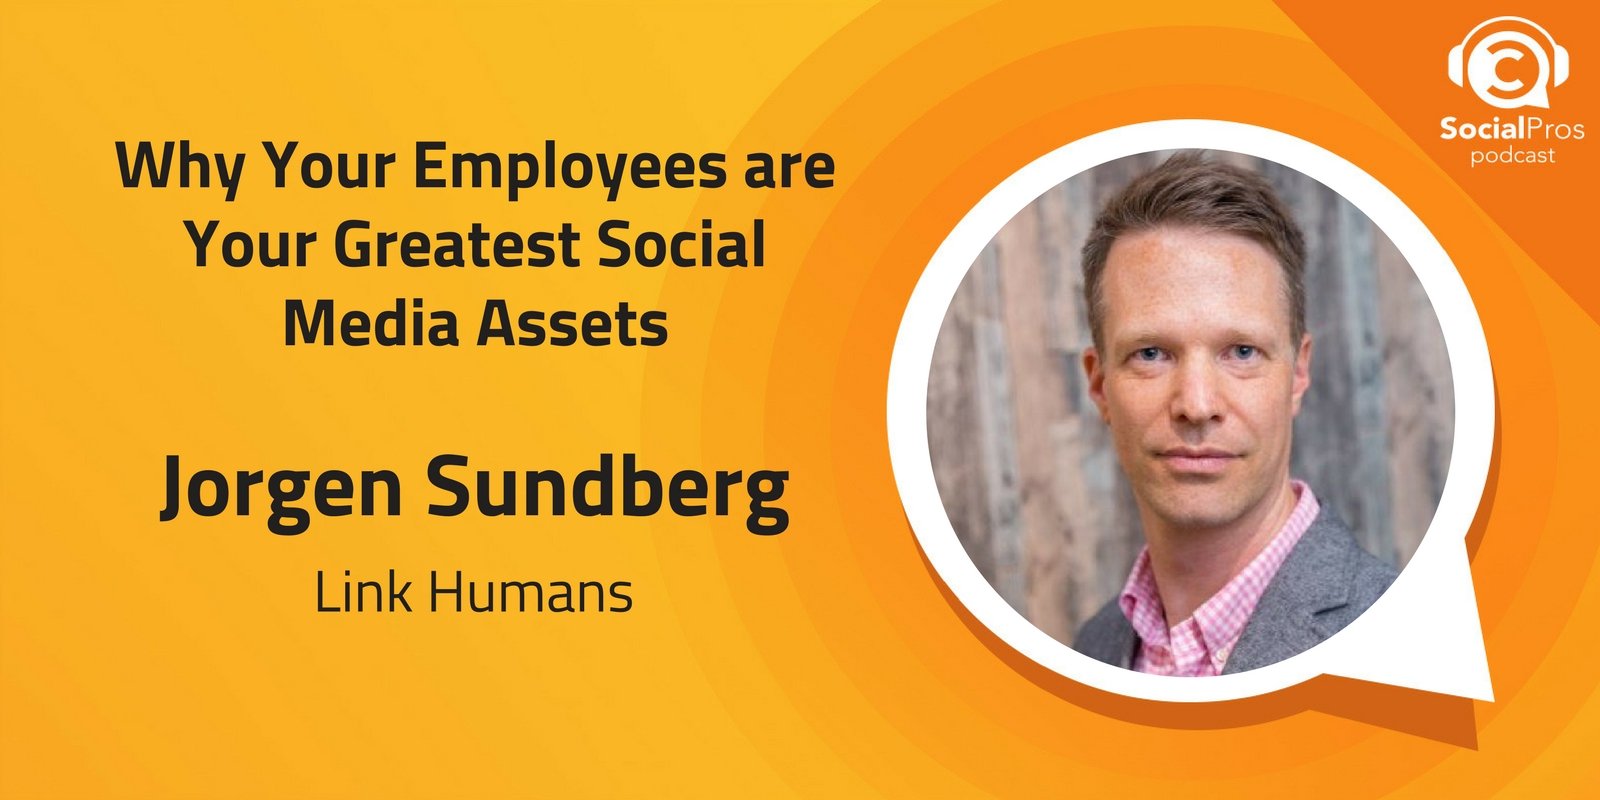 Why Your Employees are Your Greatest Social Media Assets